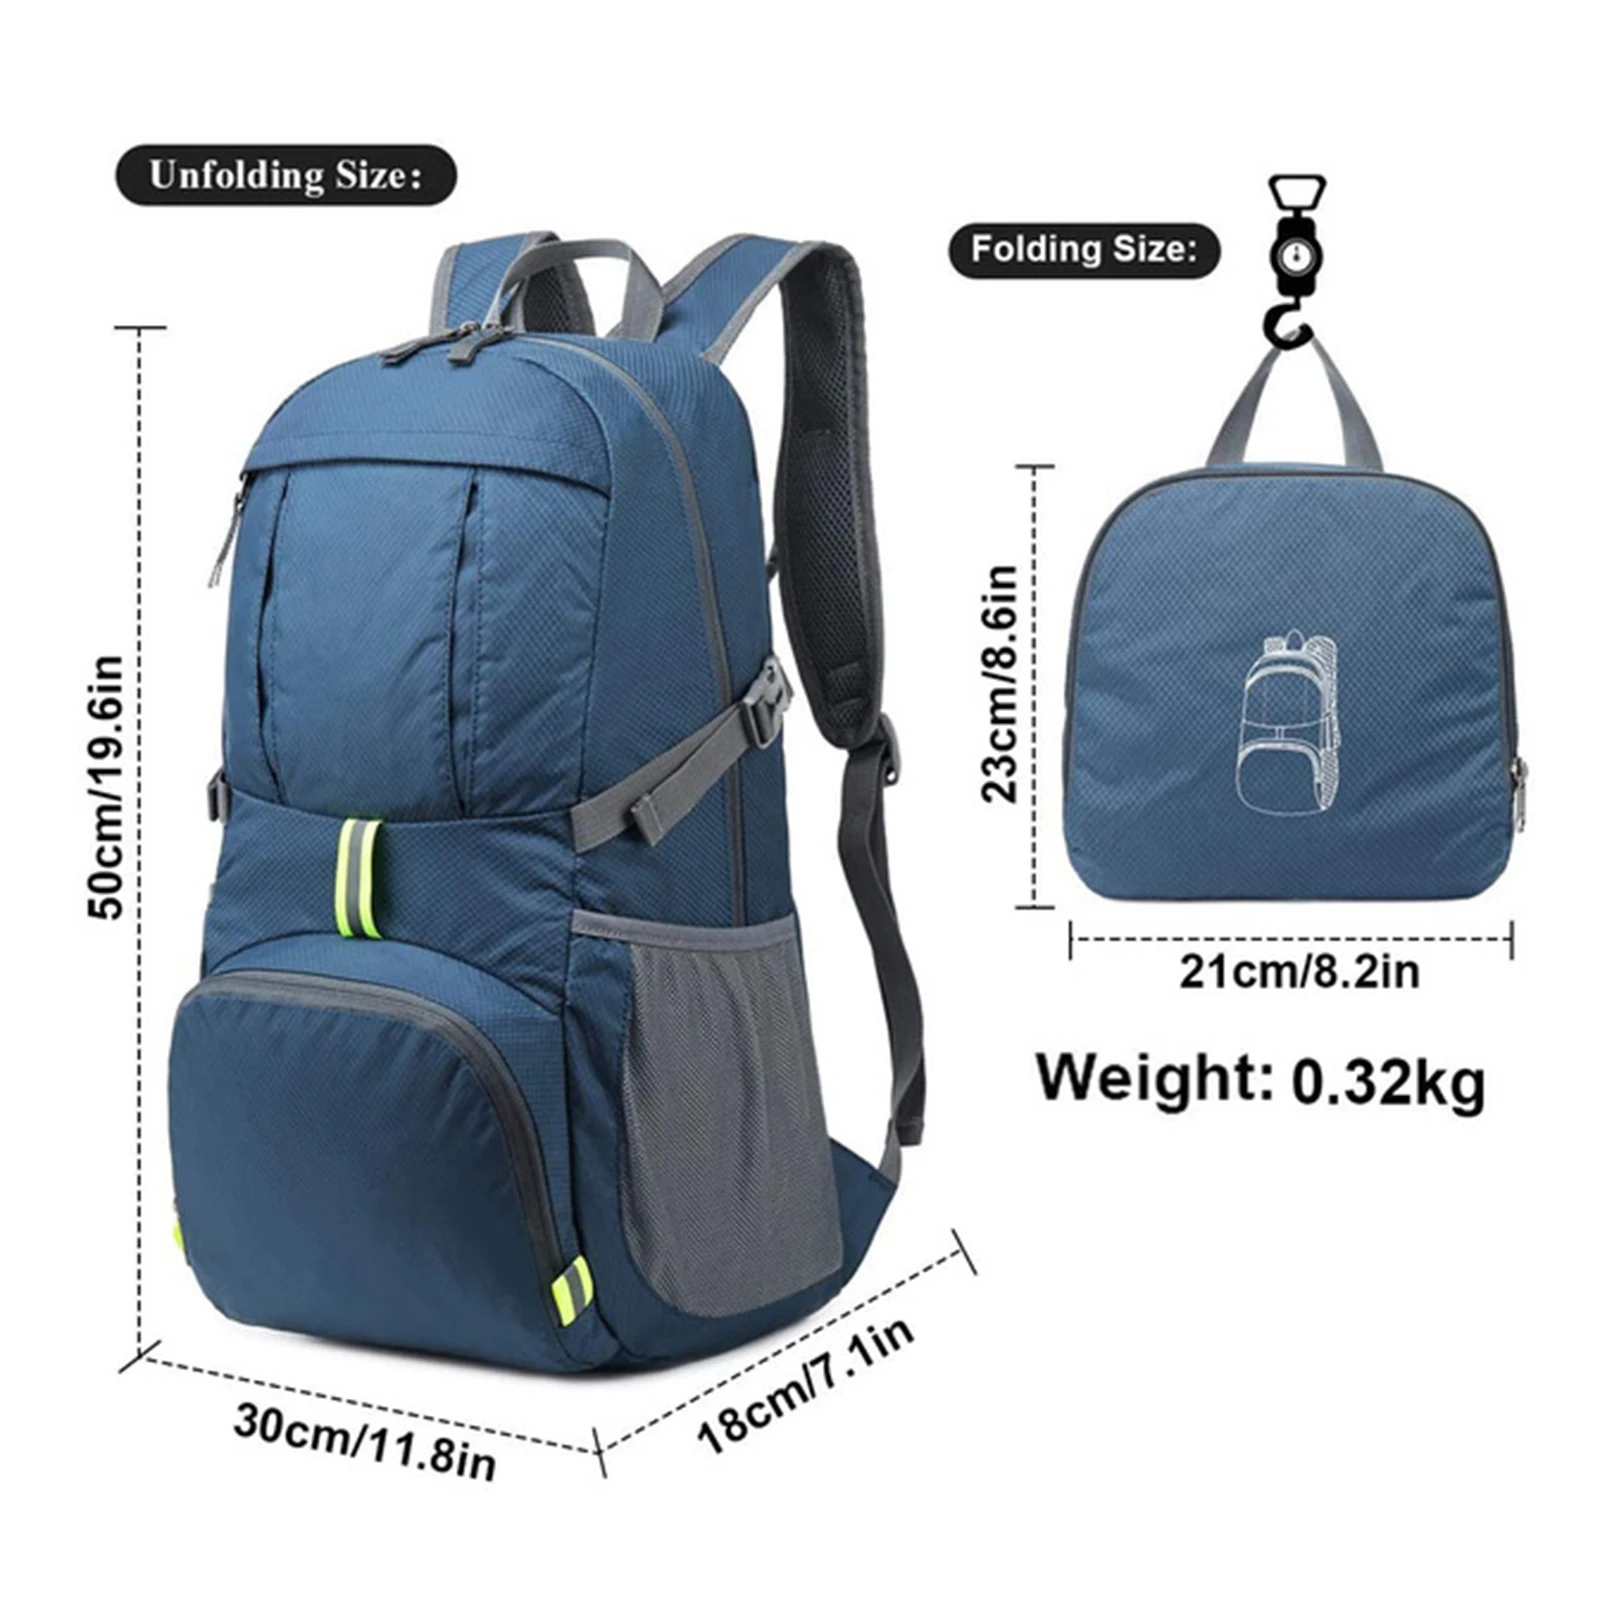 Durable Hiking Daypack Sumtree 35L Ultra Lightweight Foldable Packable Backpack 